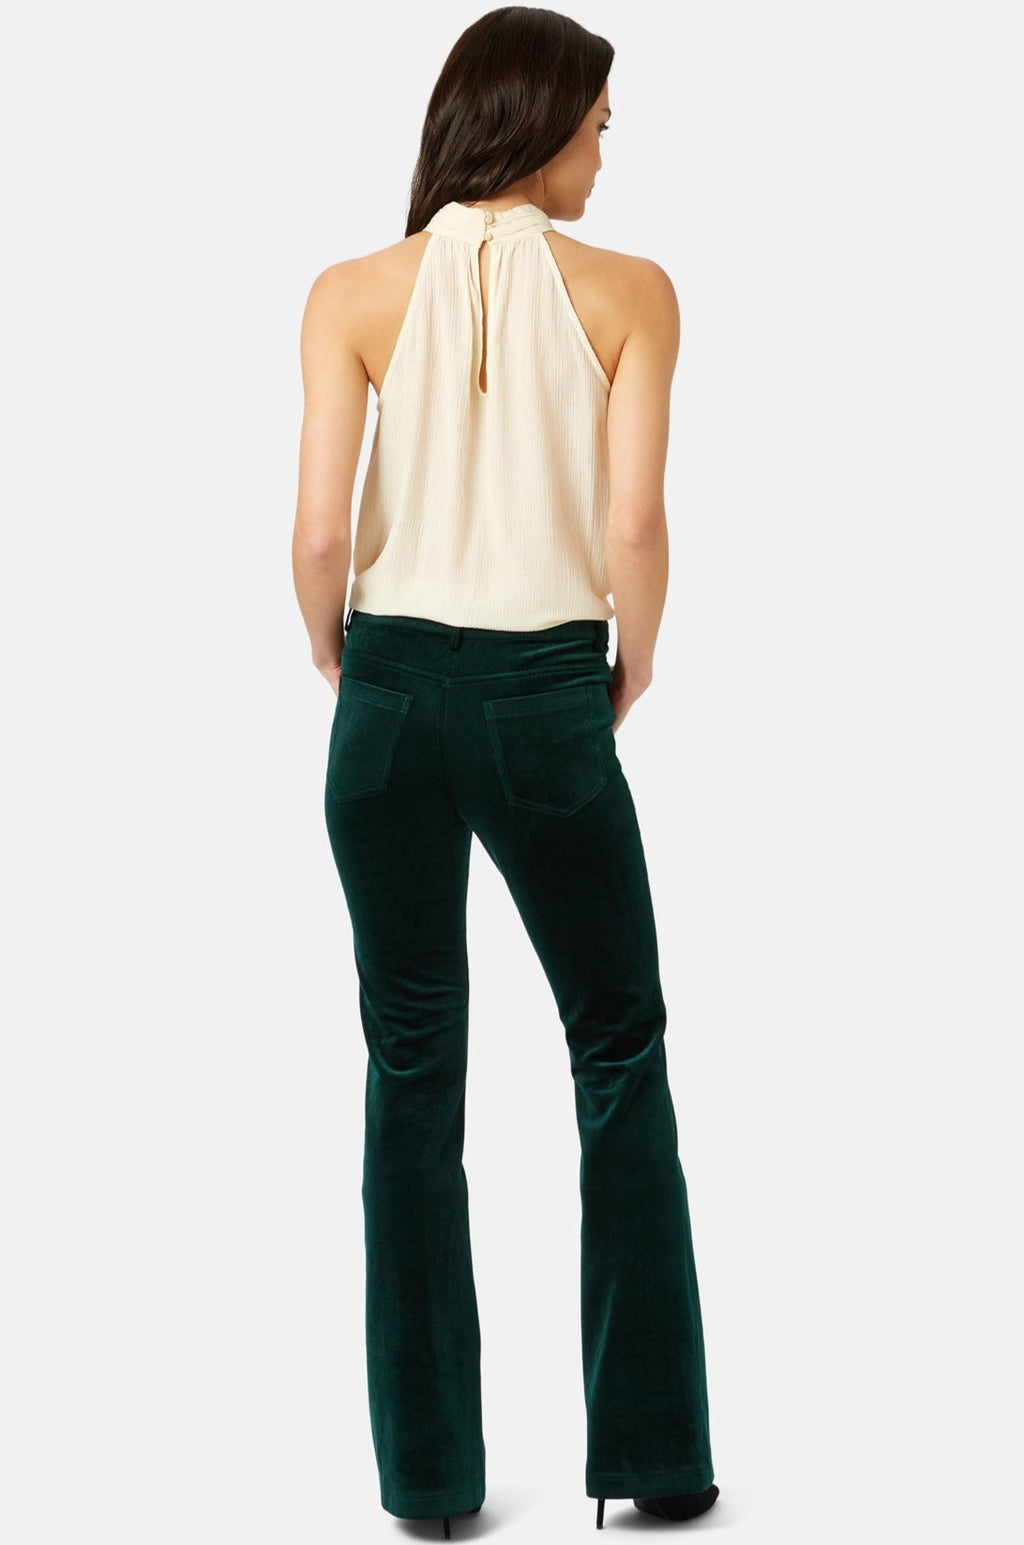 Traffic People BRATTER Flare Trouser Green - Sub Couture